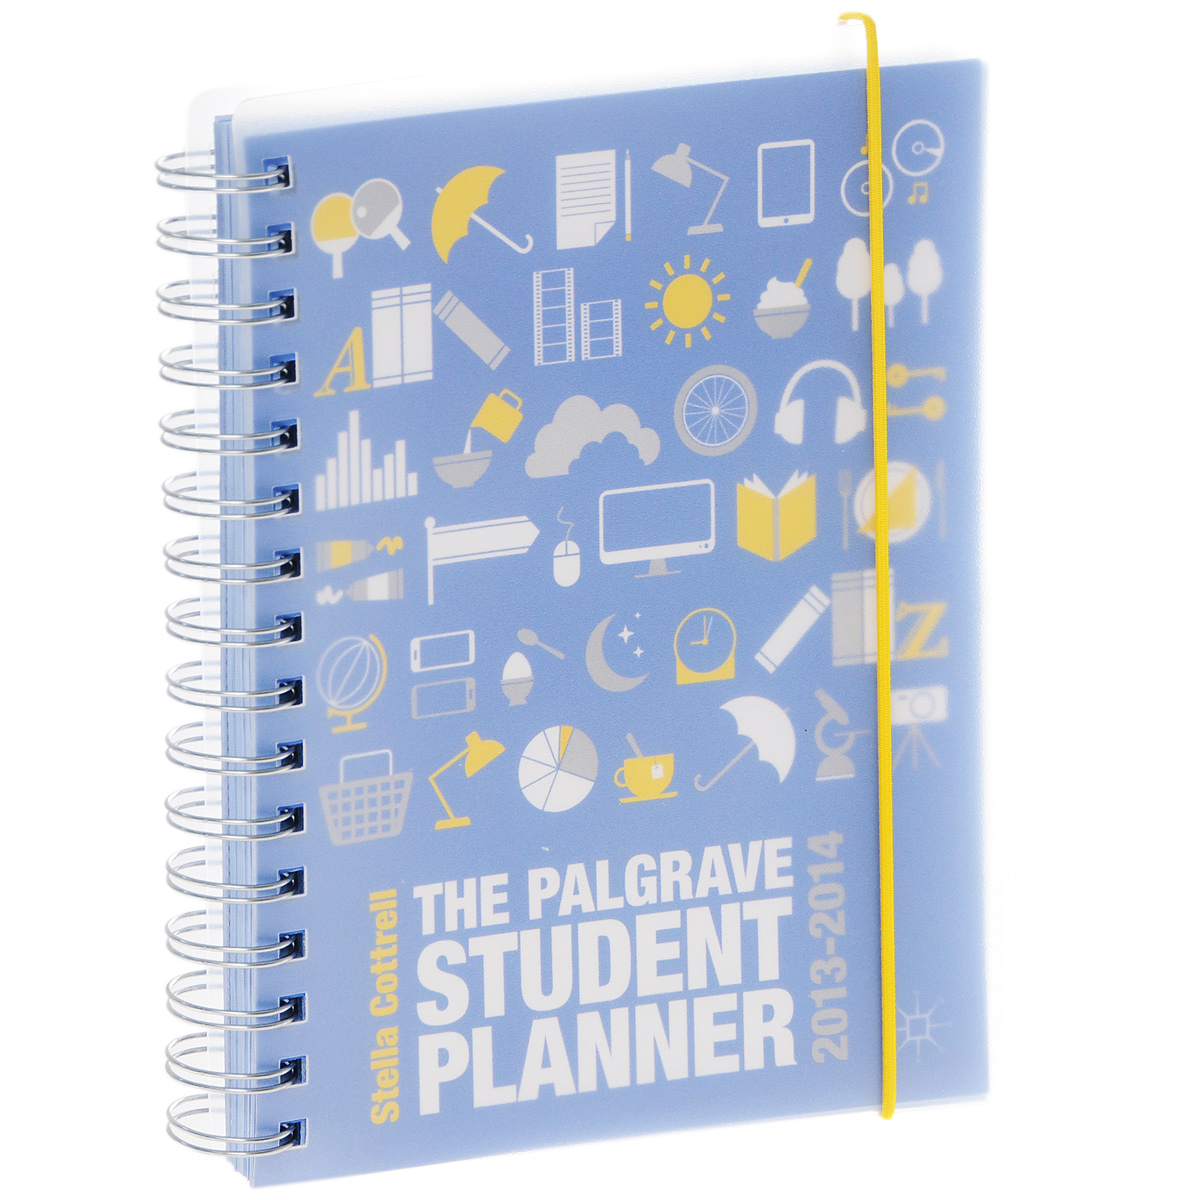 The Palgrave Student Planner 2013-2014